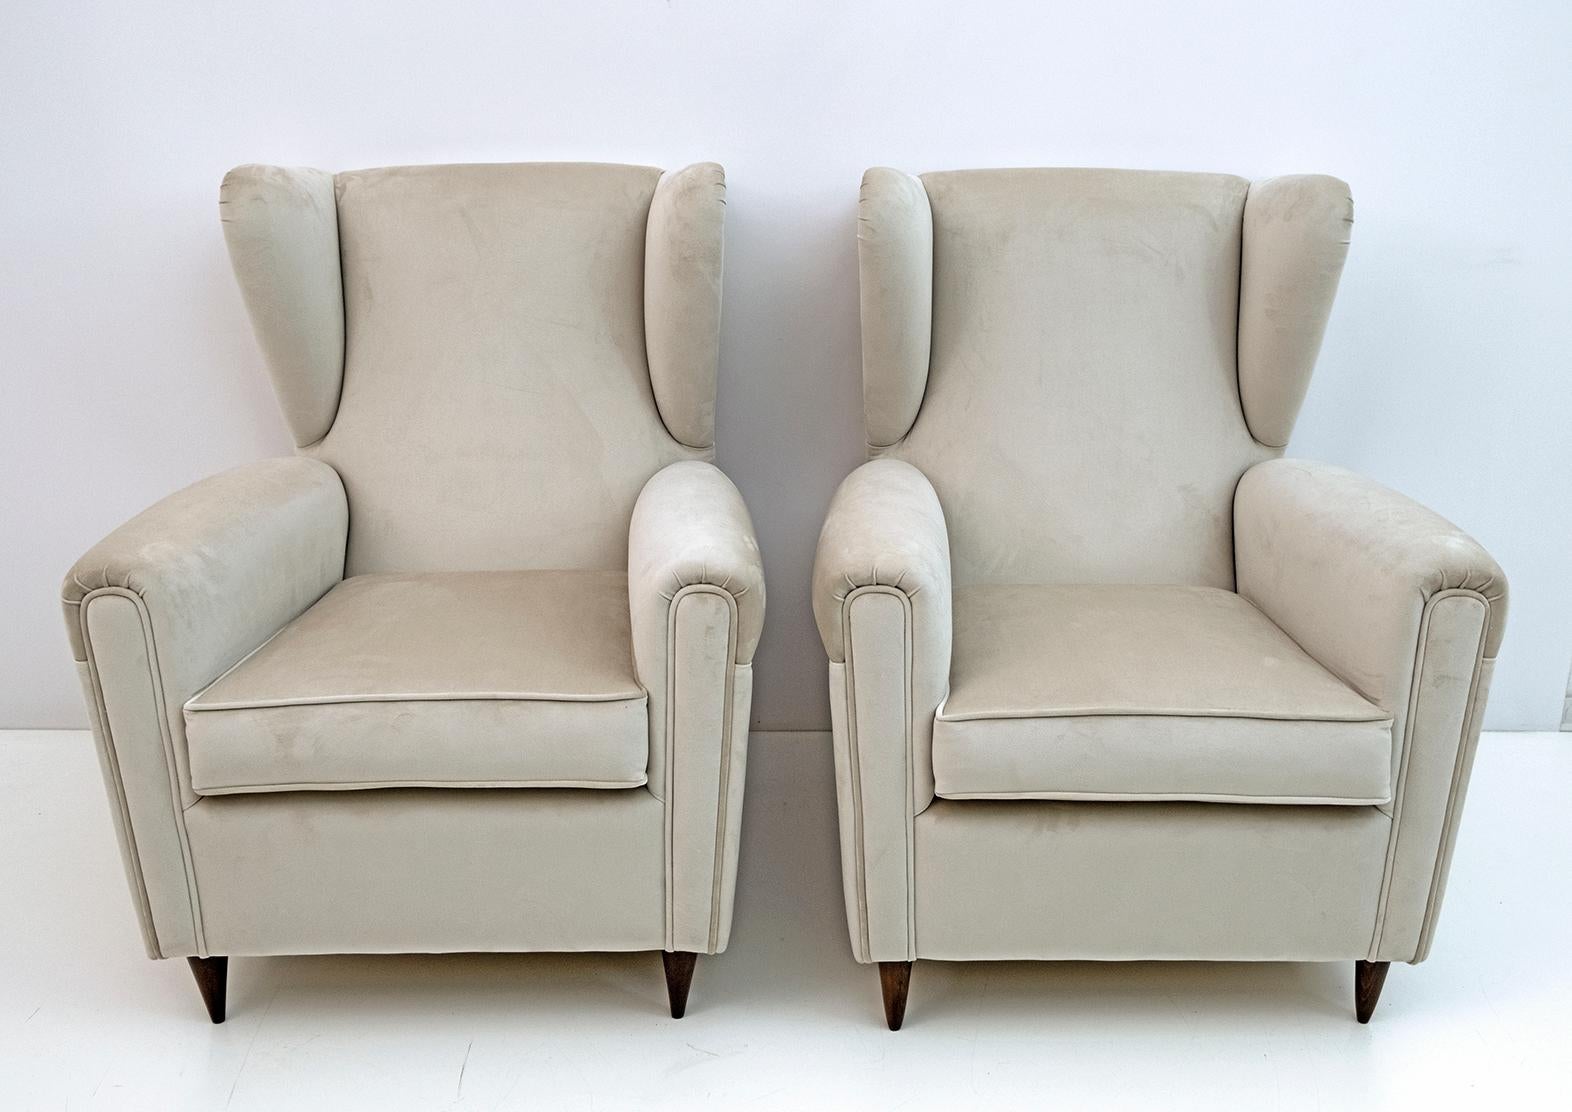 Elegant and splendid pair of Mid-Century Modern Bergere Armchairs, attributed to Gio Ponti, 1950 for ISA Editions, Bergamo. The armchairs have a new light ivory velvet upholstery.